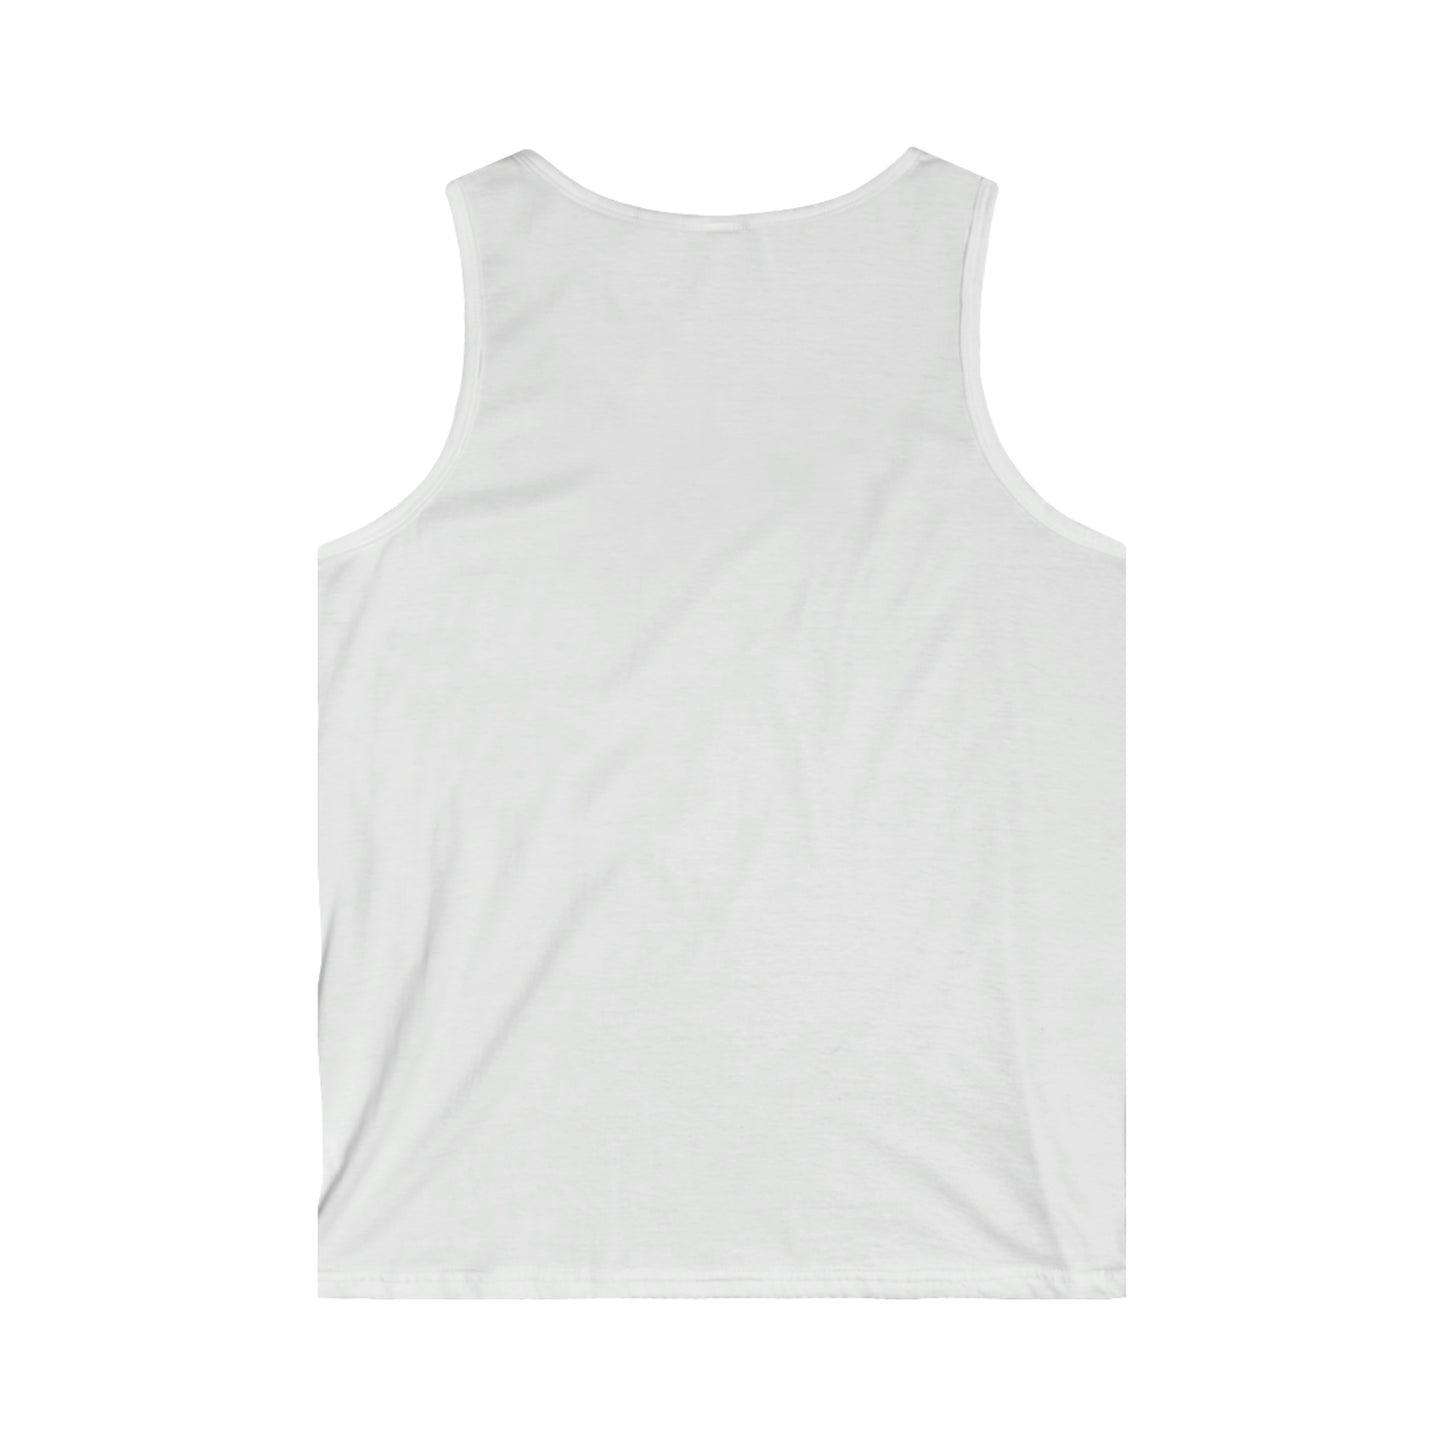 ‘Always keep Evolving’  Men's Softstyle Tank Top